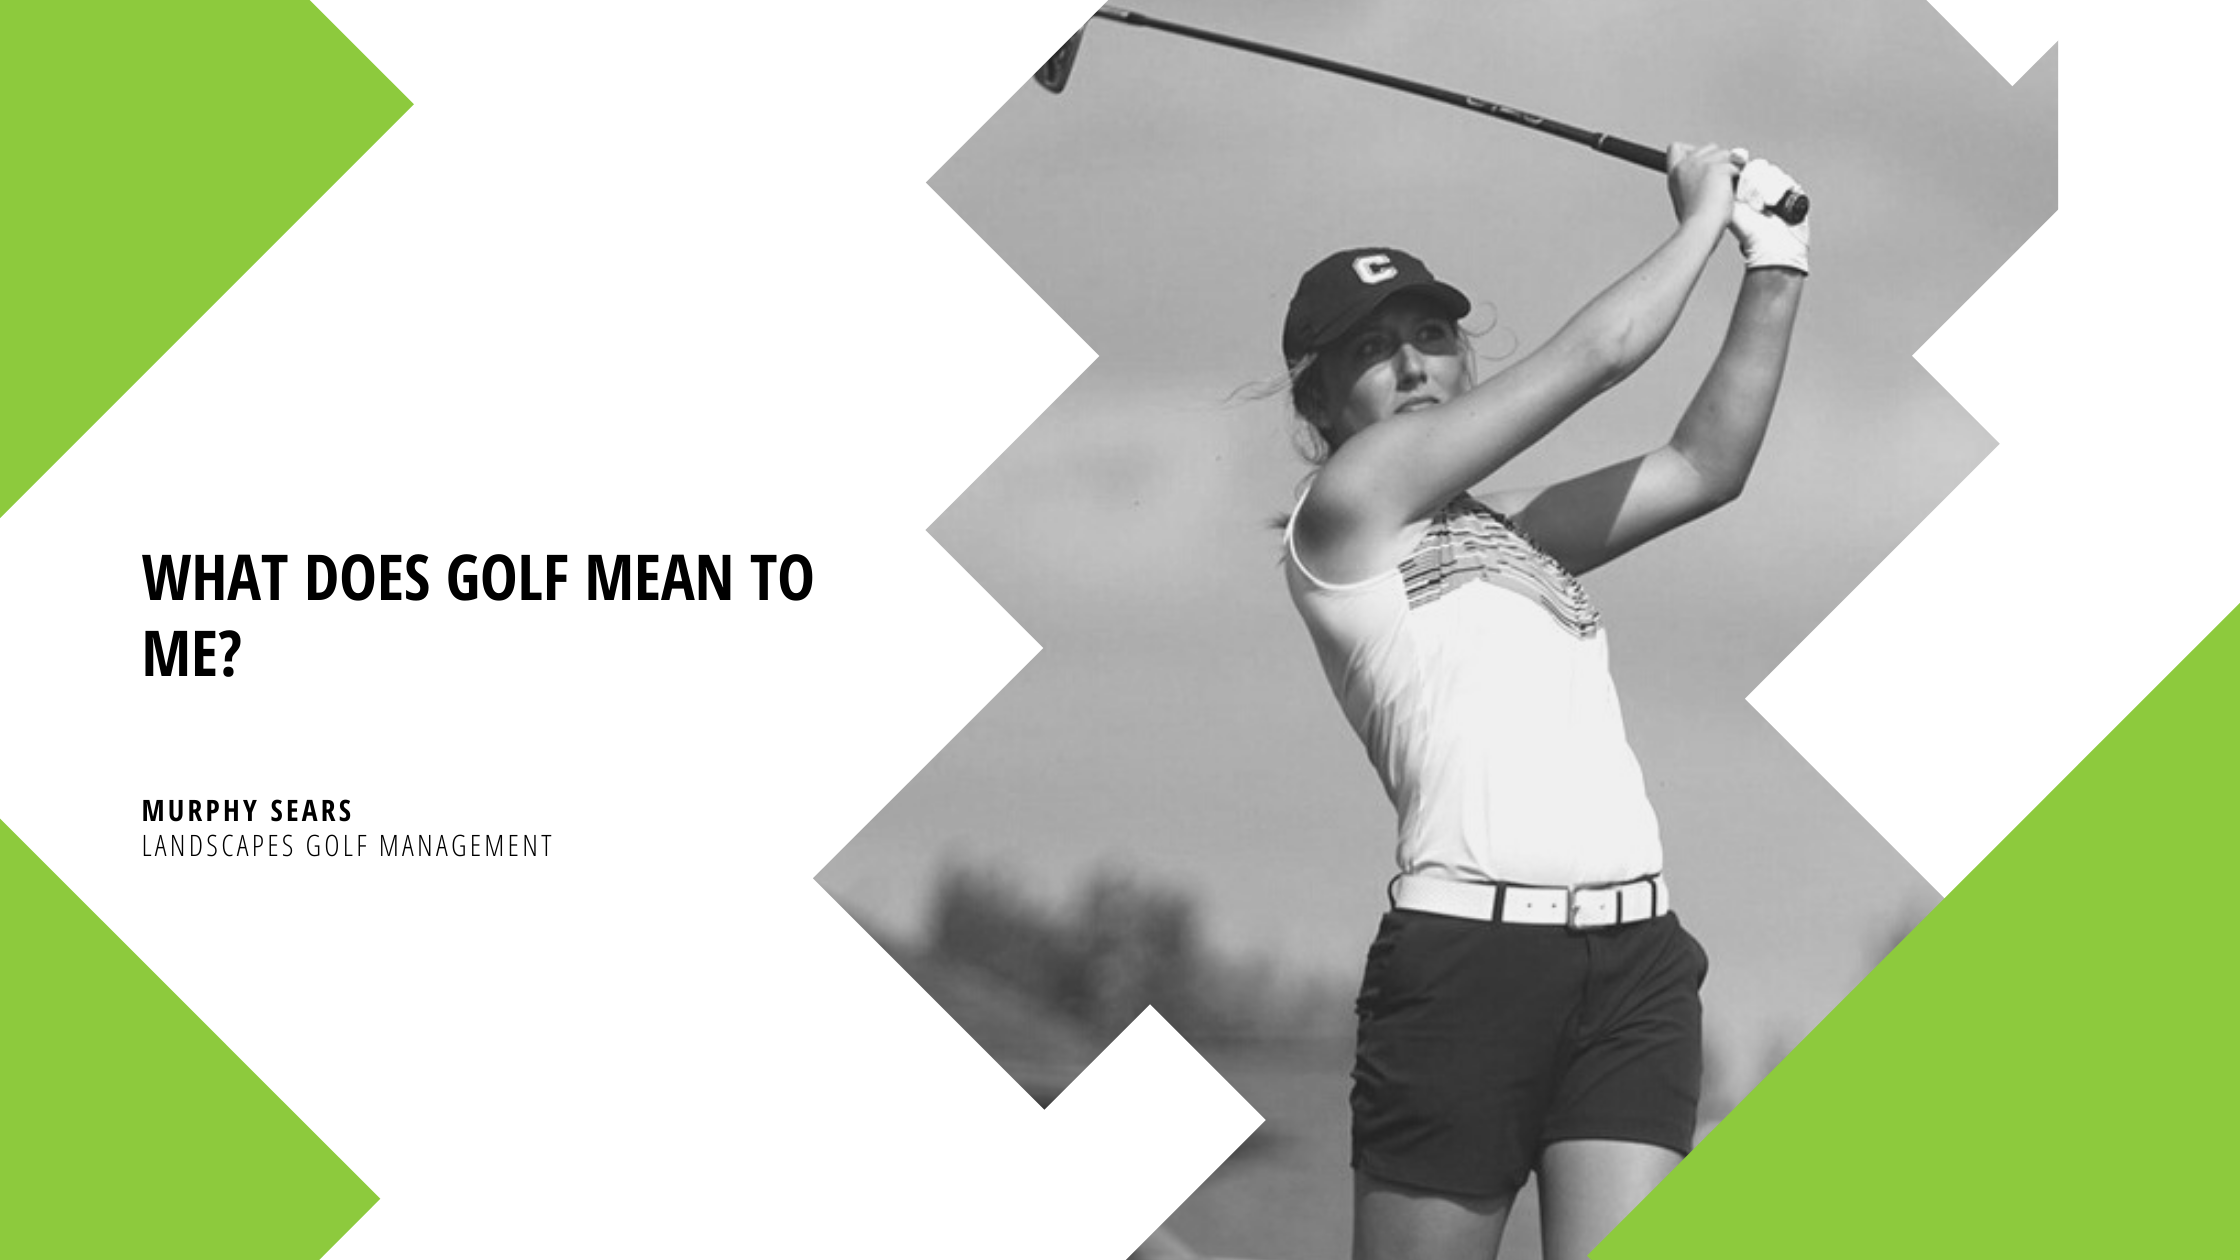 What Does Golf Mean To Me?